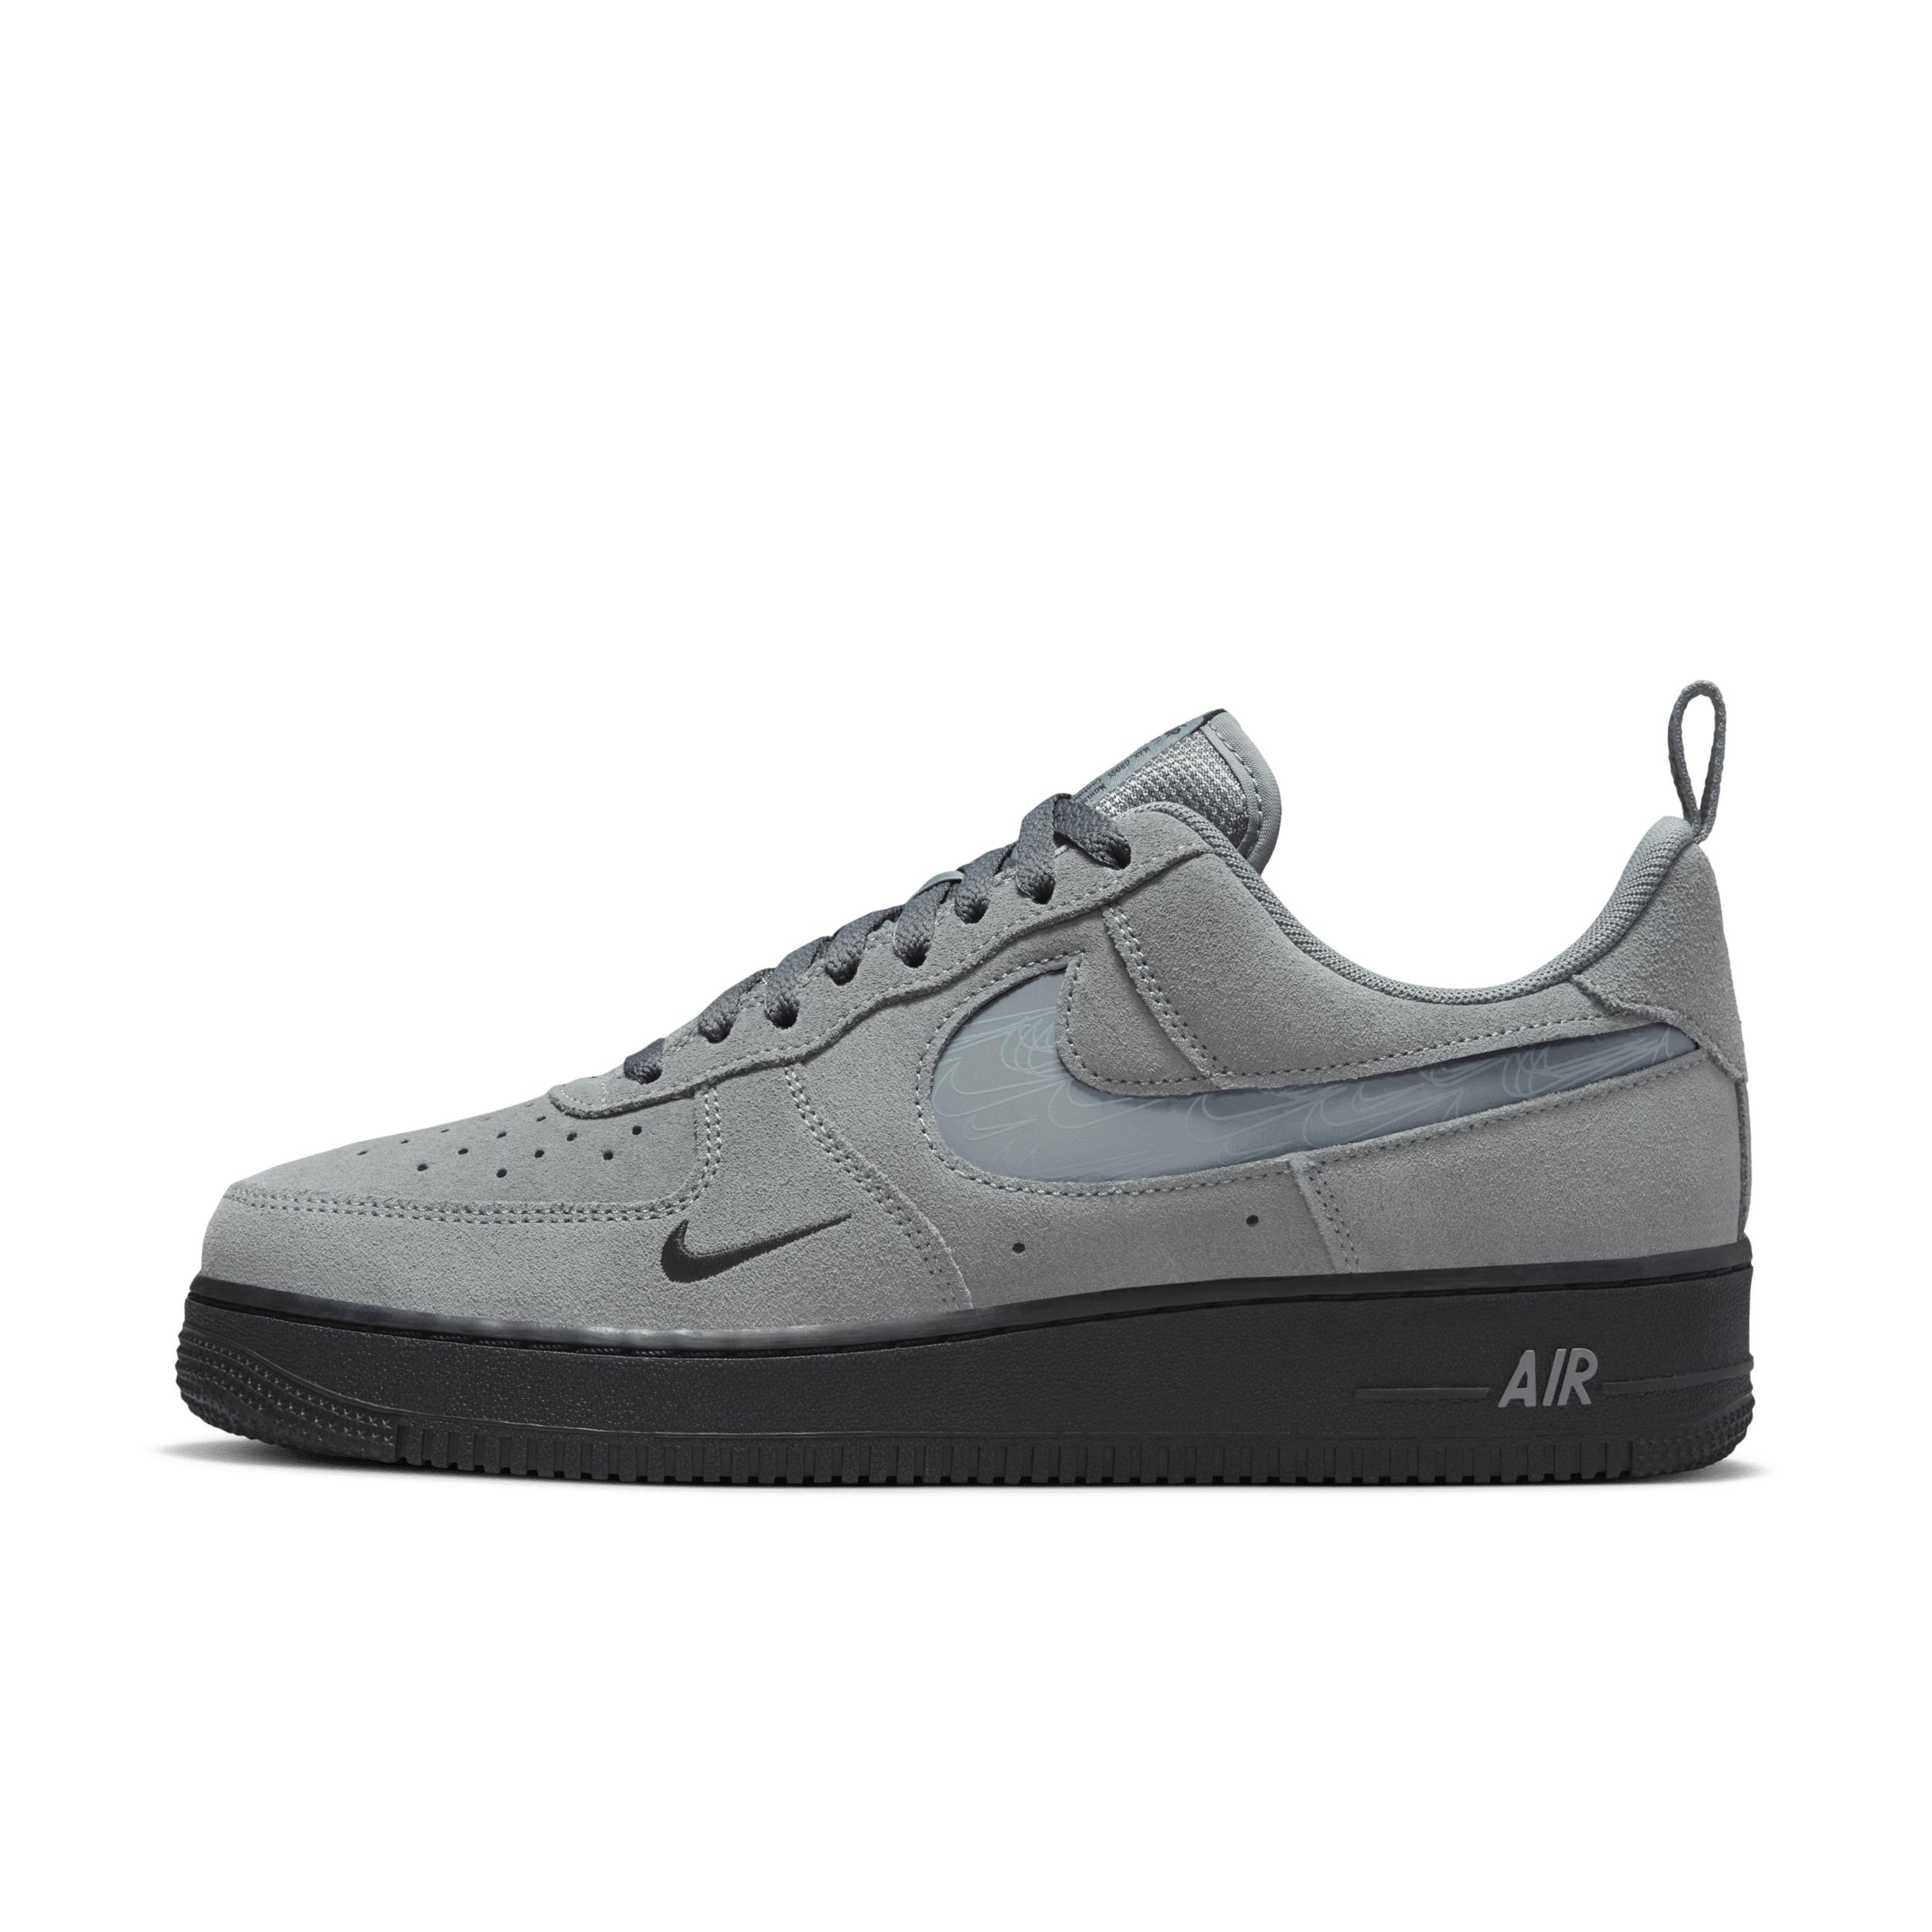 Nike Air Force 1 07 LV8 'Psychic Blue' Shoes - Size 12